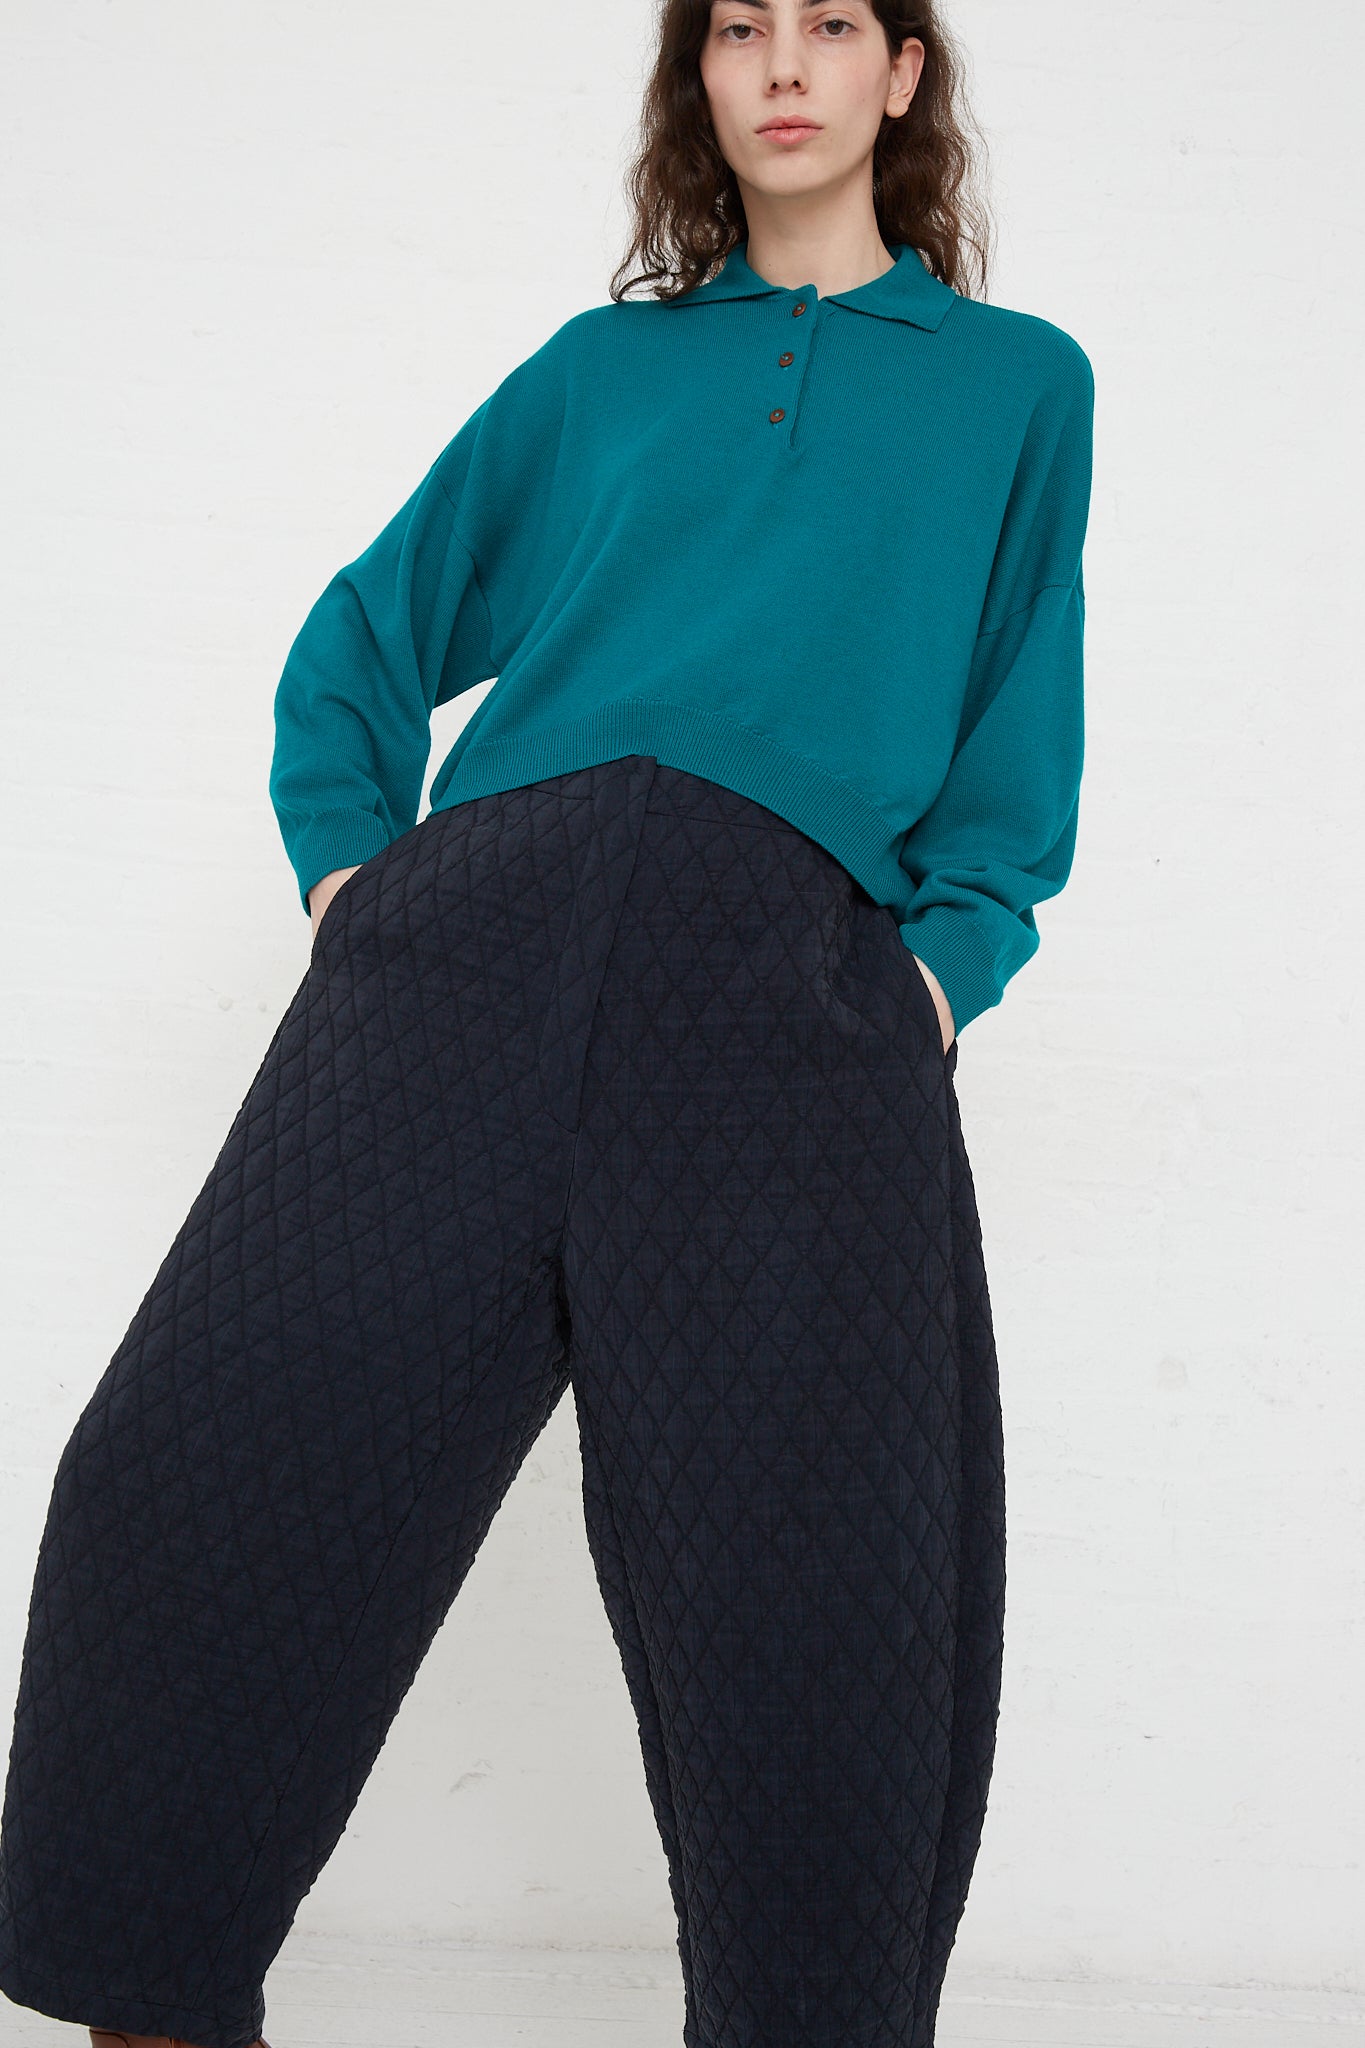 A model wearing a teal sweater with Cordera's Quilted Curved Pant in Black featuring an elasticated waist.